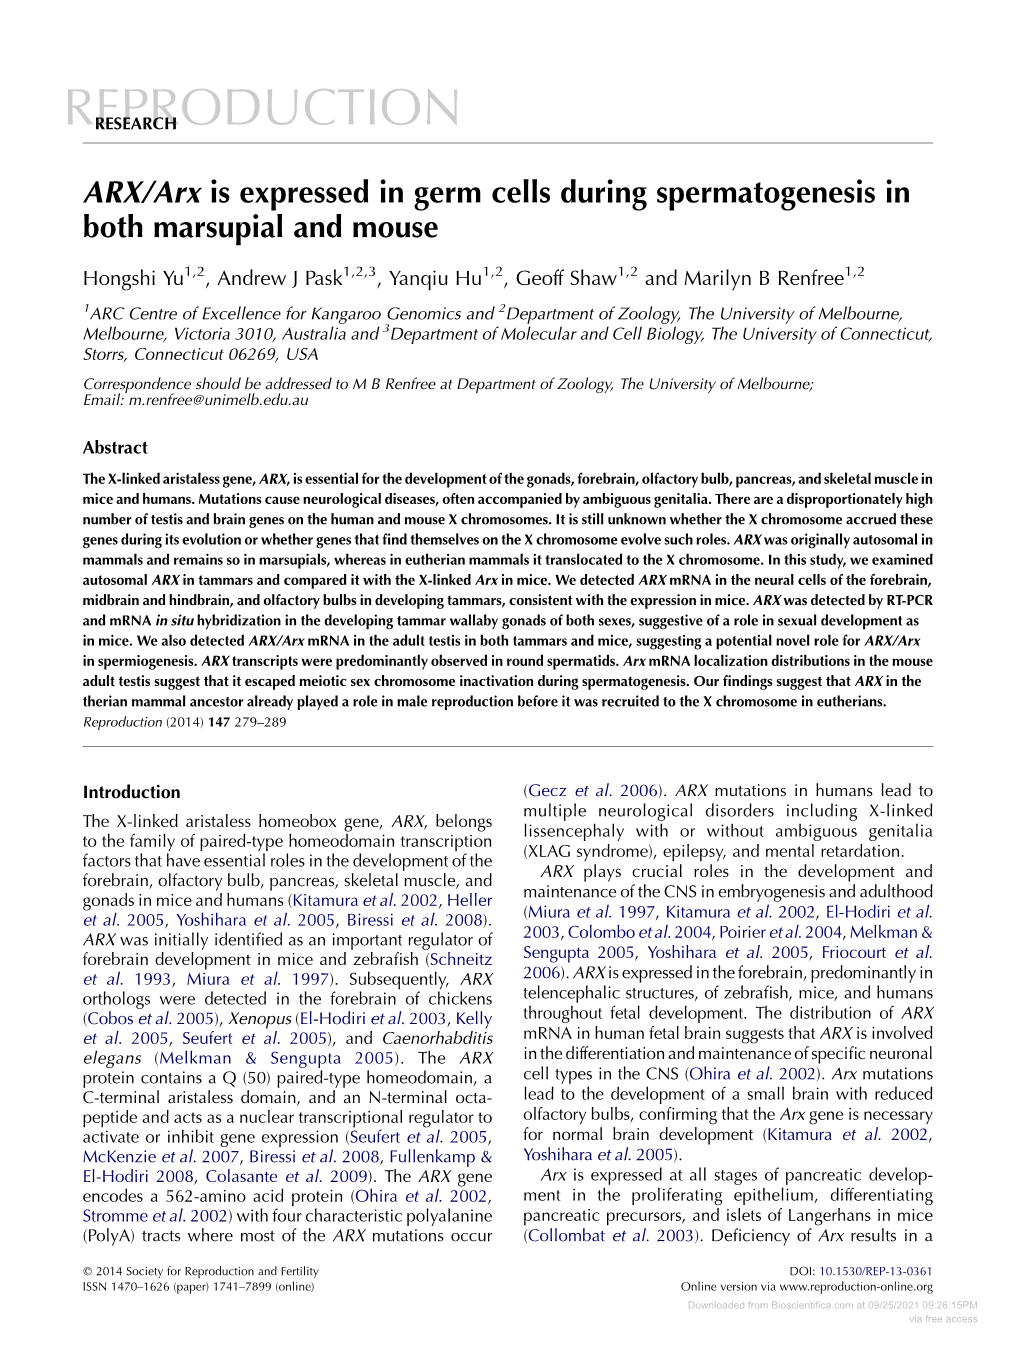 ARX/Arx Is Expressed in Germ Cells During Spermatogenesis in Both Marsupial and Mouse